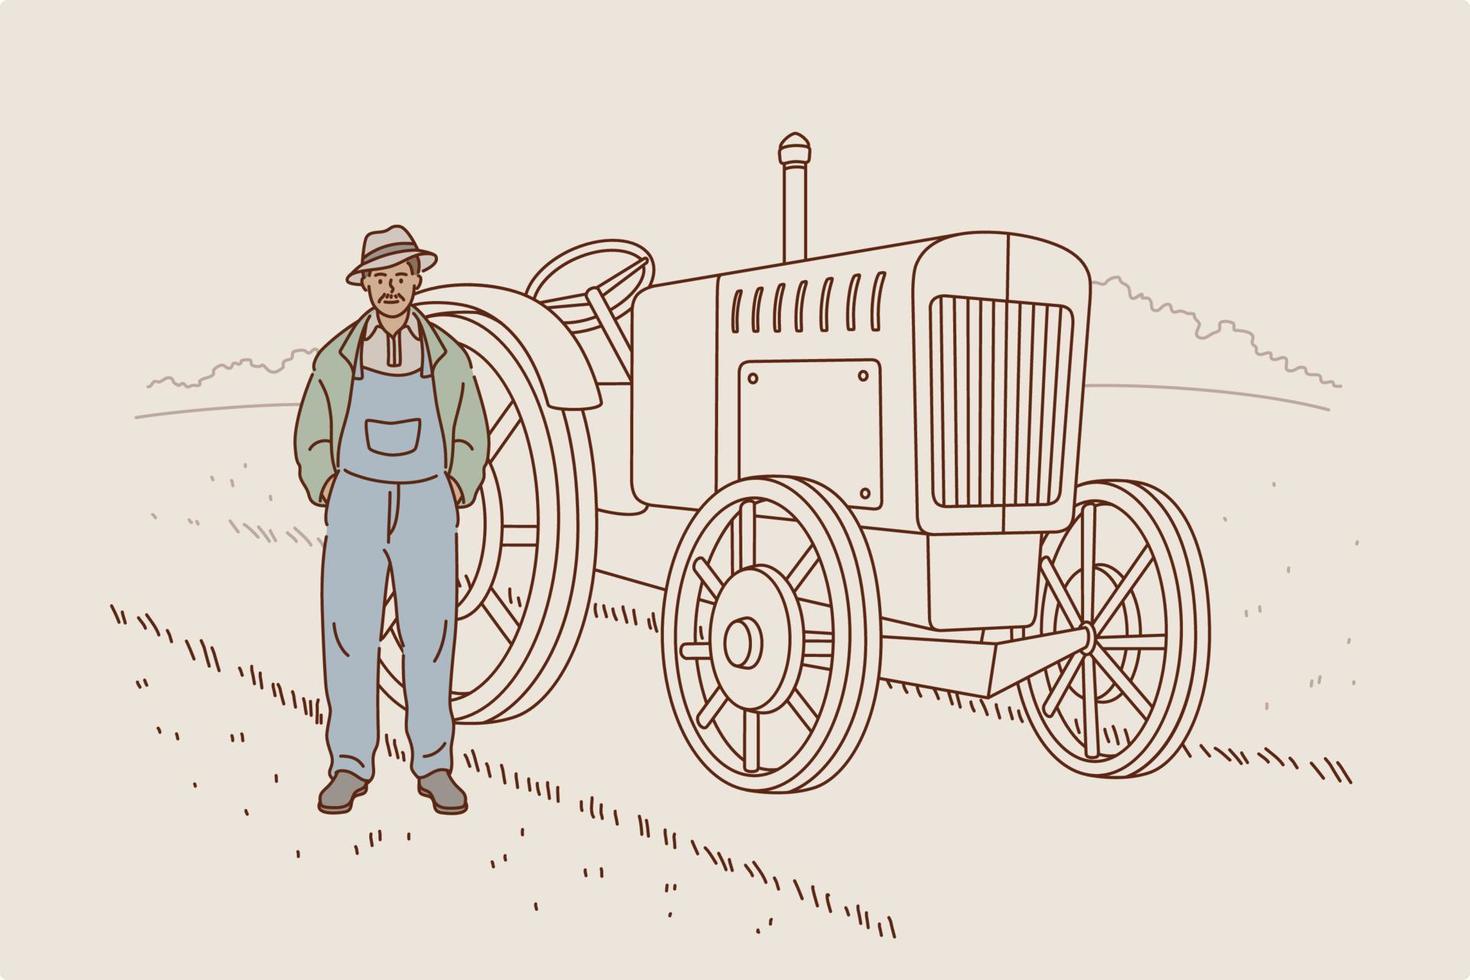 Harvest and working on farm concept. Smiling man cartoon character farmer agricultural worker standing on field during harvesting on machine vector illustration